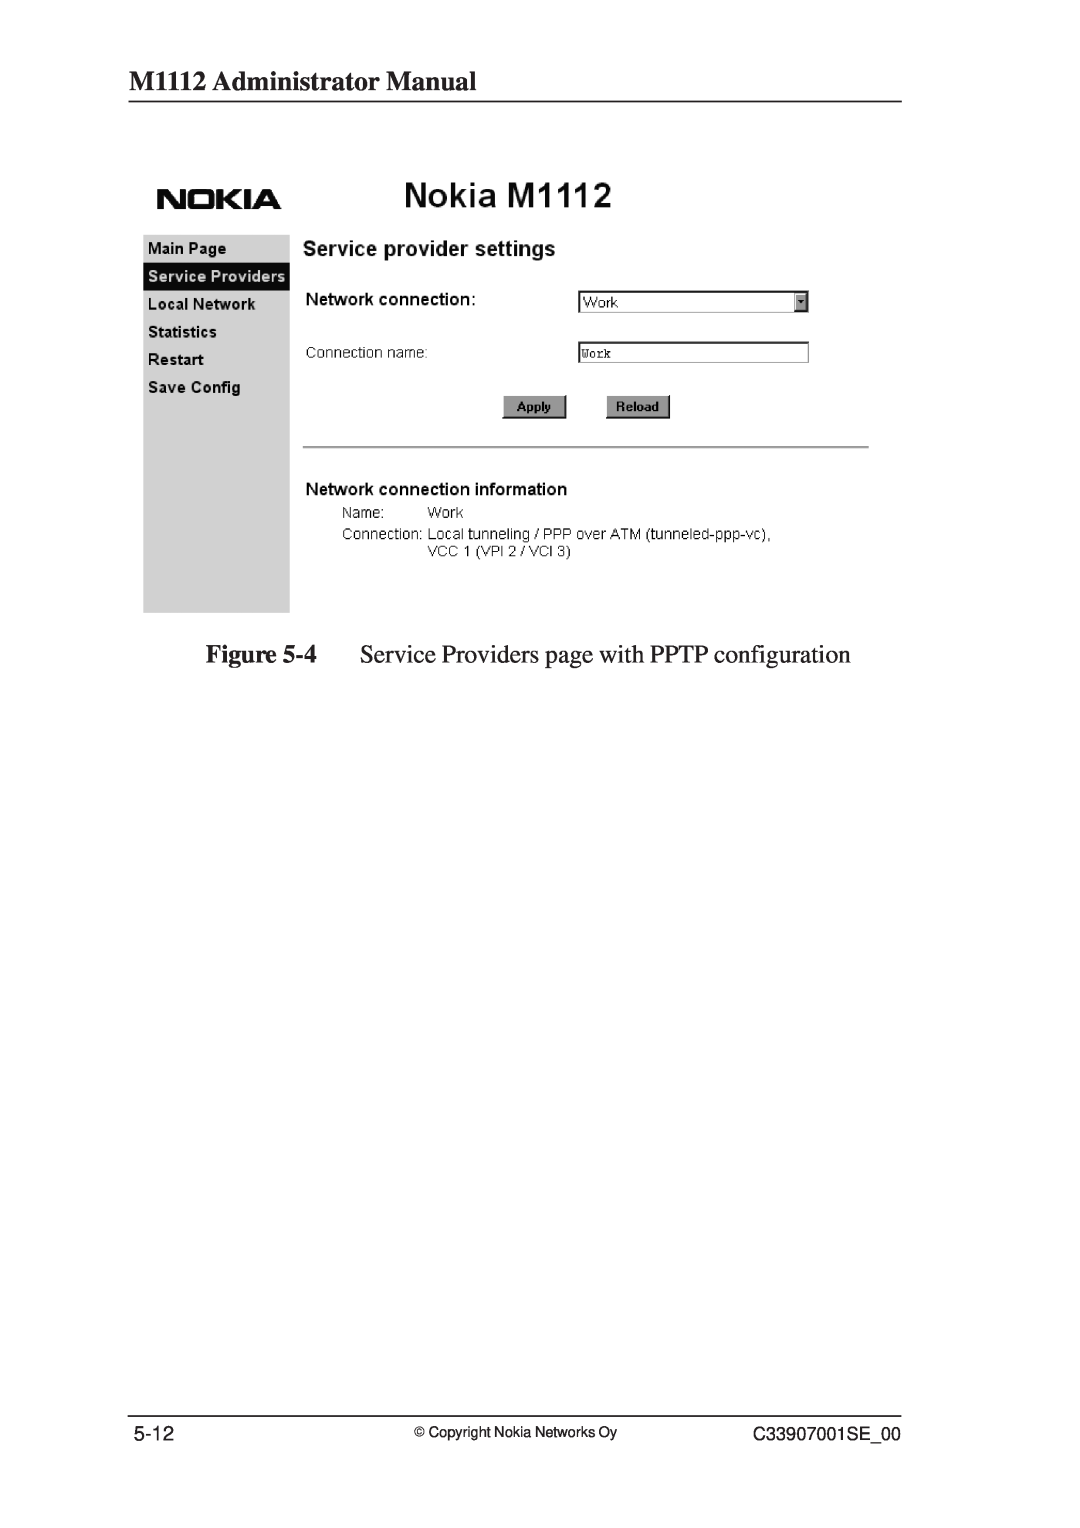 Nokia M1112 Administrator Manual, 4 Service Providers page with PPTP configuration, 5-12, E Copyright Nokia Networks Oy 